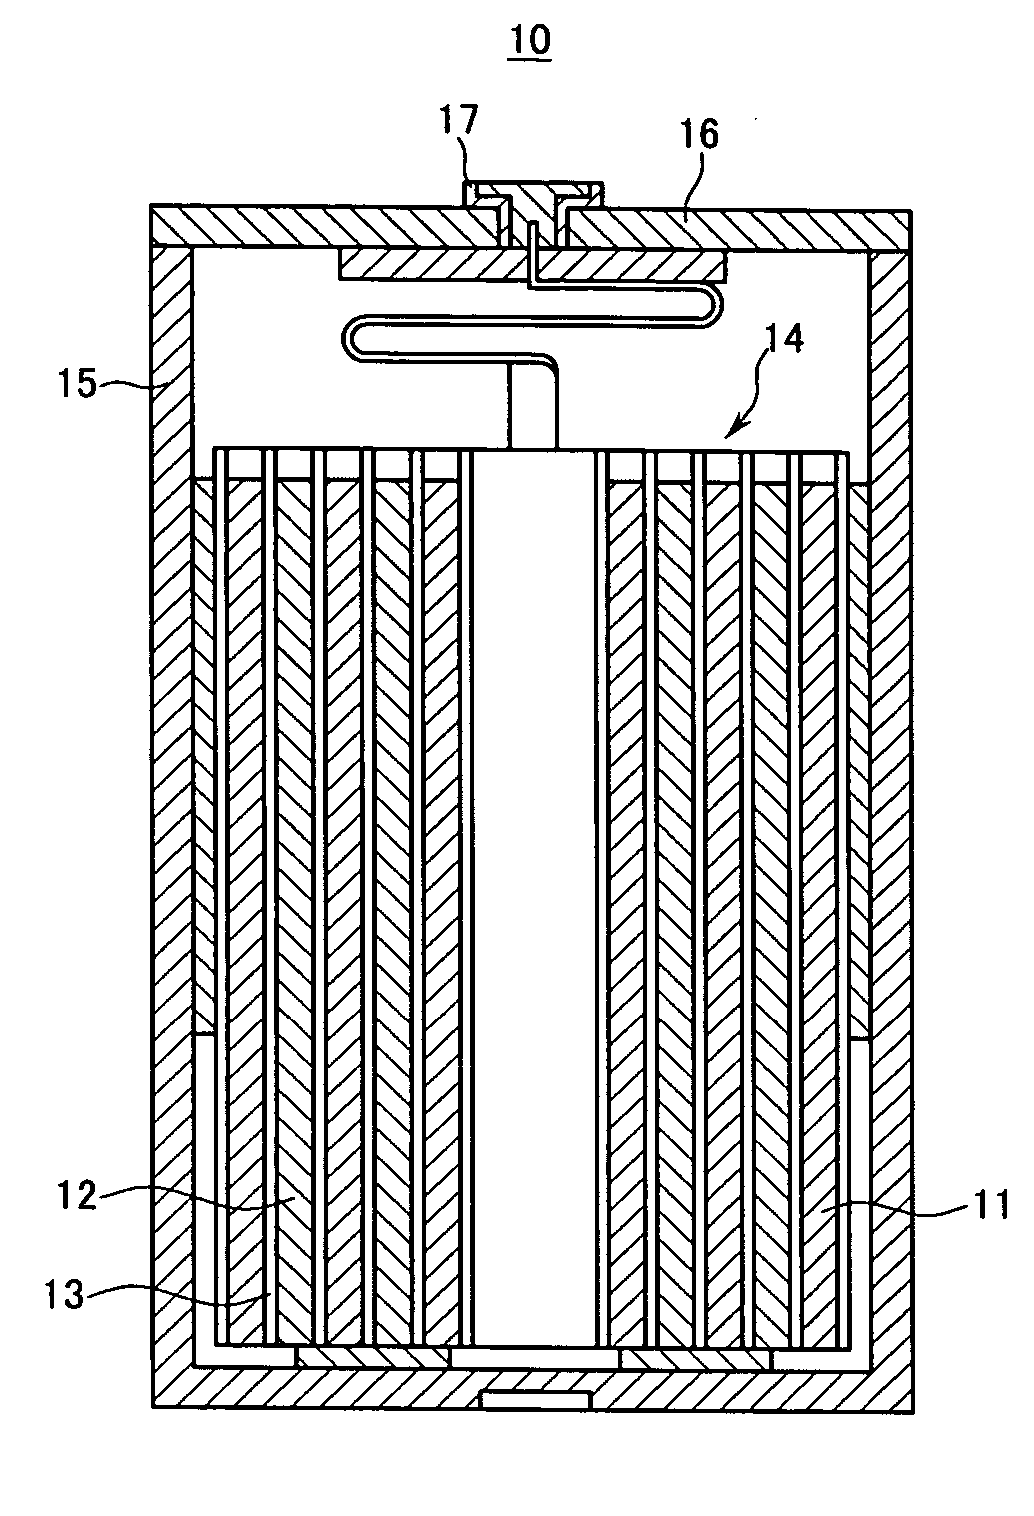 Negative active material for a rechargeable lithium battery, method for preparing the same, and rechargeable lithium battery including the same